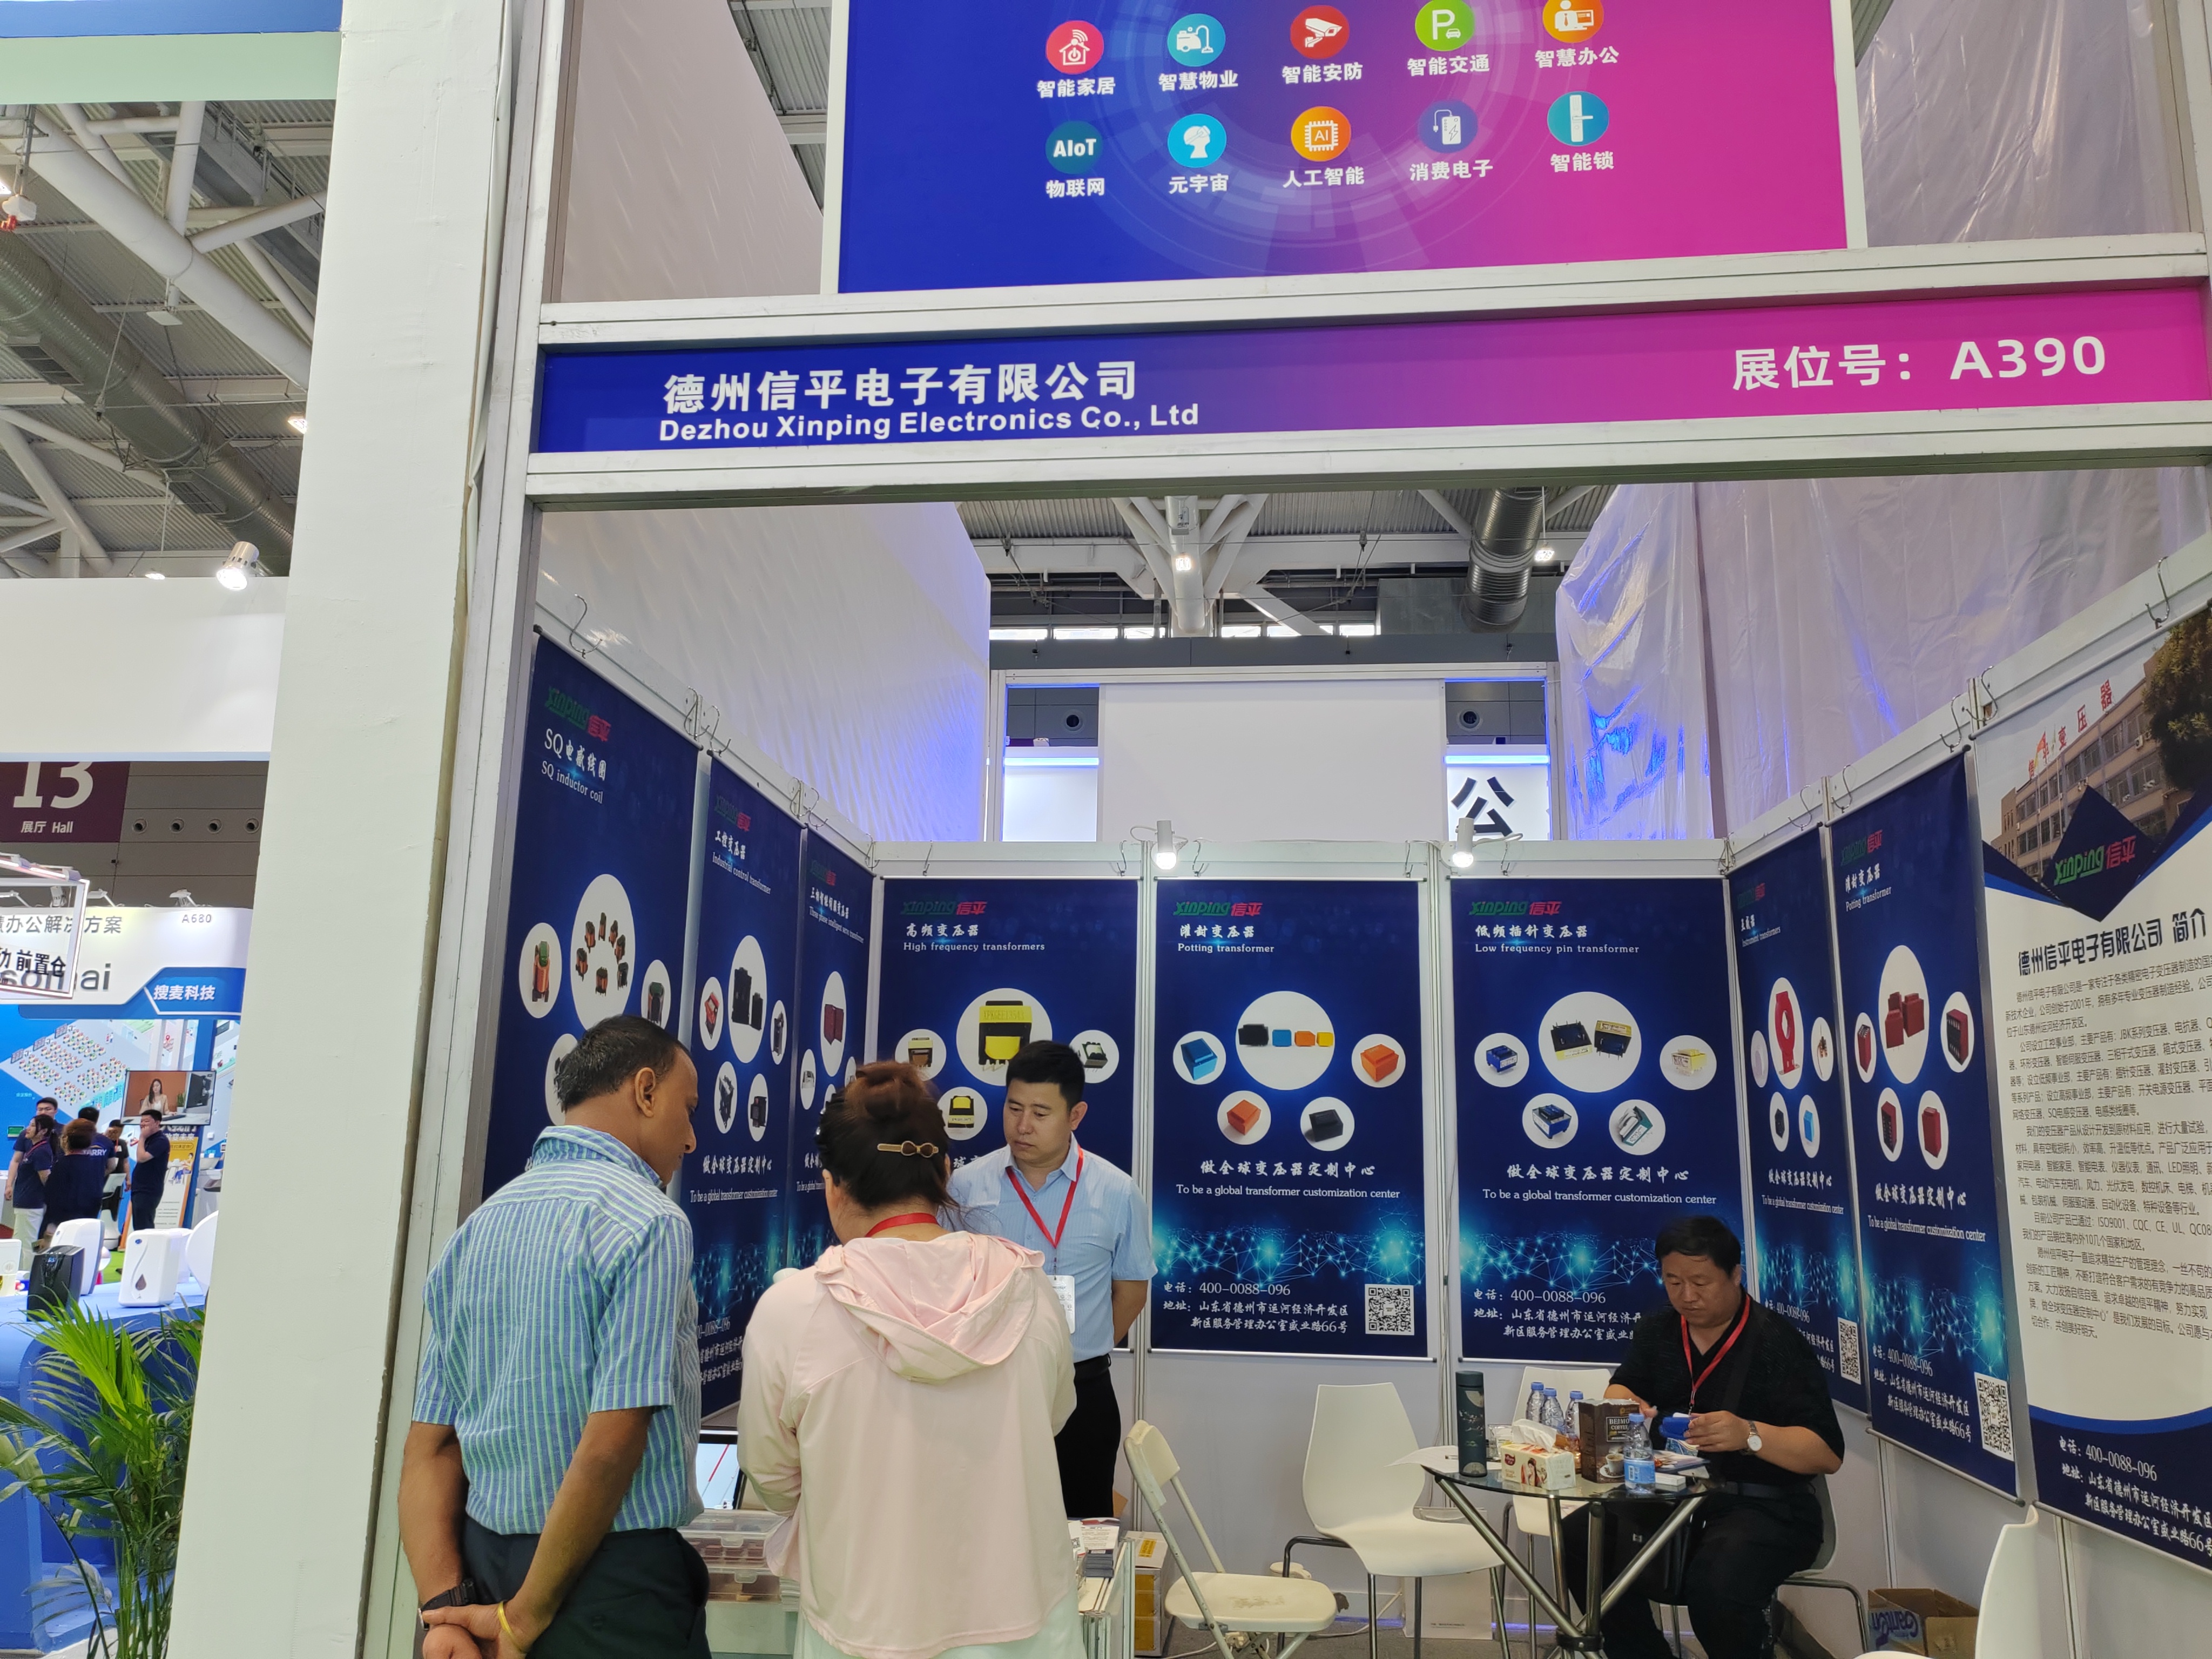 Participating in the Smart Home Exhibition （2023-5-16-18 in Shenzhen, China）